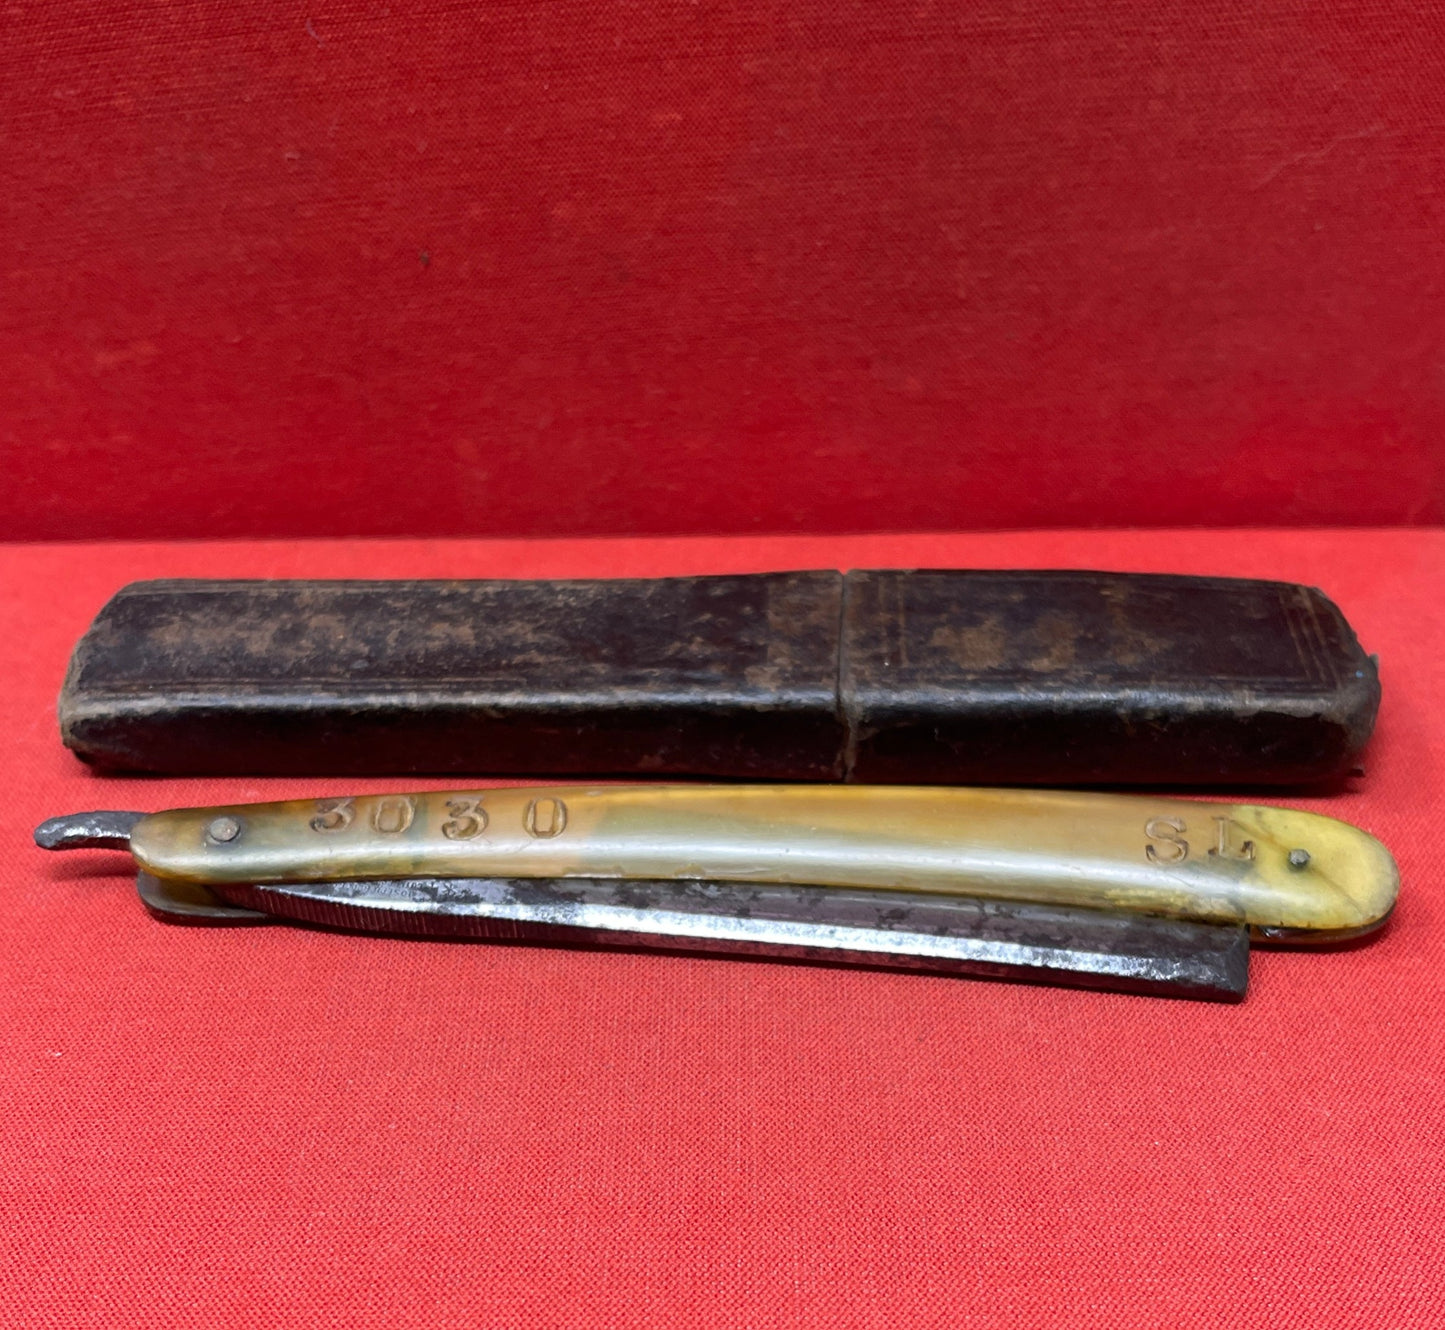 Military Vintage "Cut Throat Razor"." Joseph Rodgers and sons"